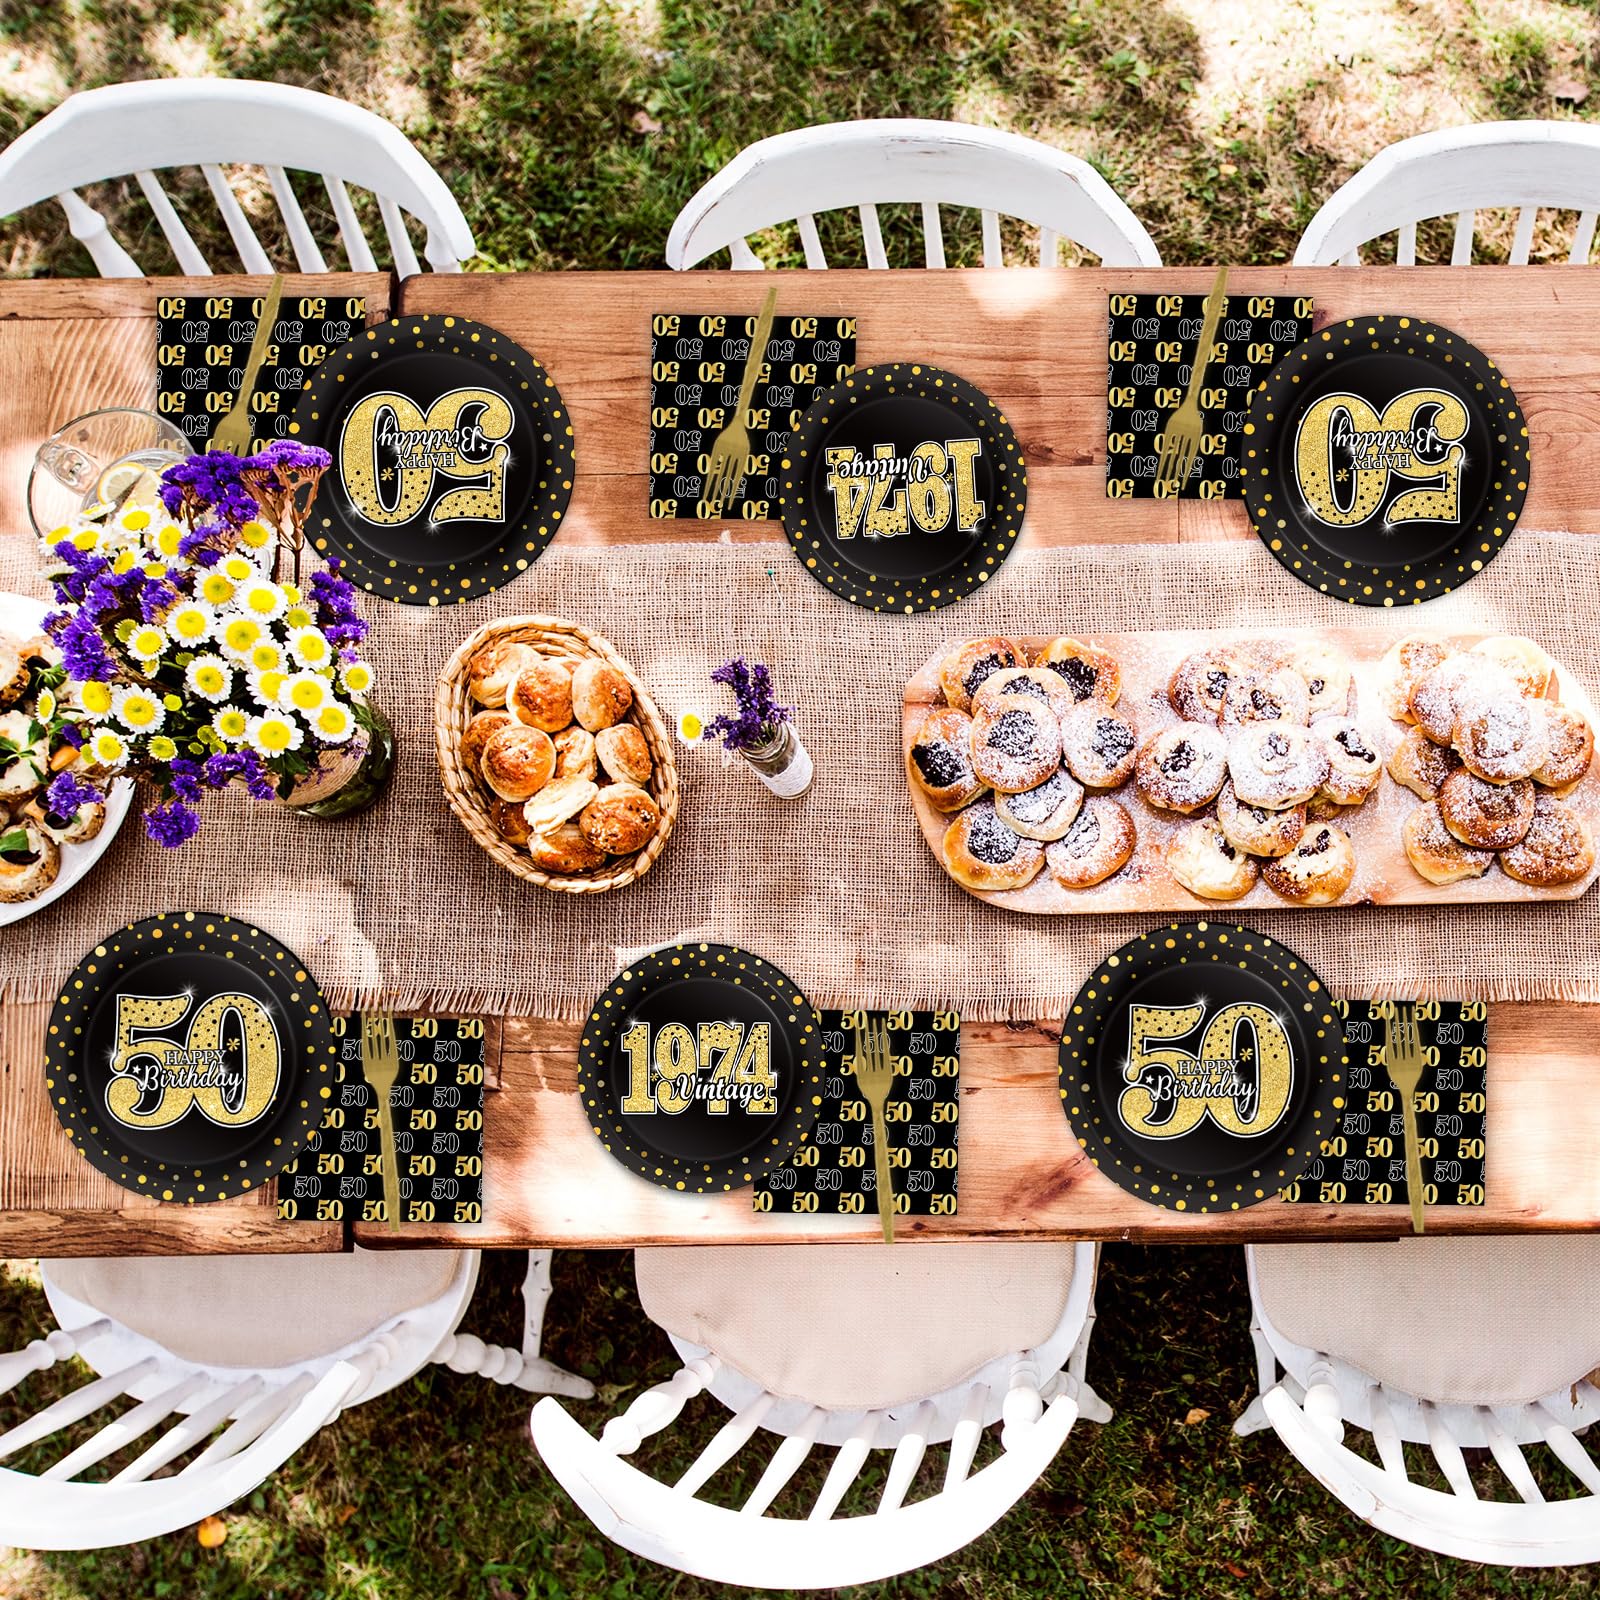 96 Pcs Vintage 50th Birthday Party Decorations Vintage 1974 Birthday Party Tableware for Men Woman Cheers to 50 Years Party Dessert Plates Napkins Forks for 24 Guests Back in 1974 Party Favors